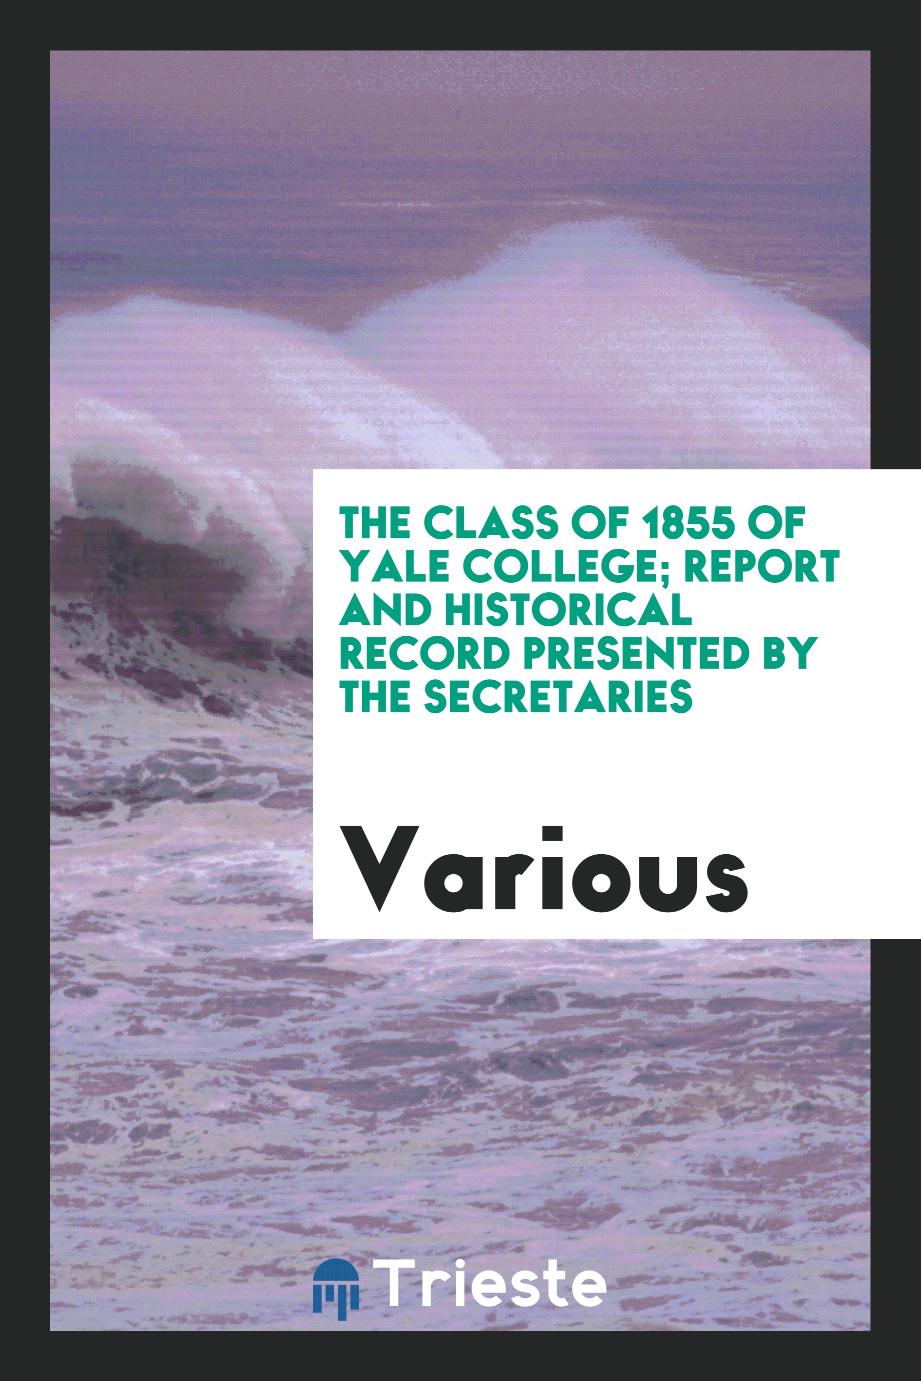 The Class of 1855 of Yale college; Report and historical record presented by the secretaries